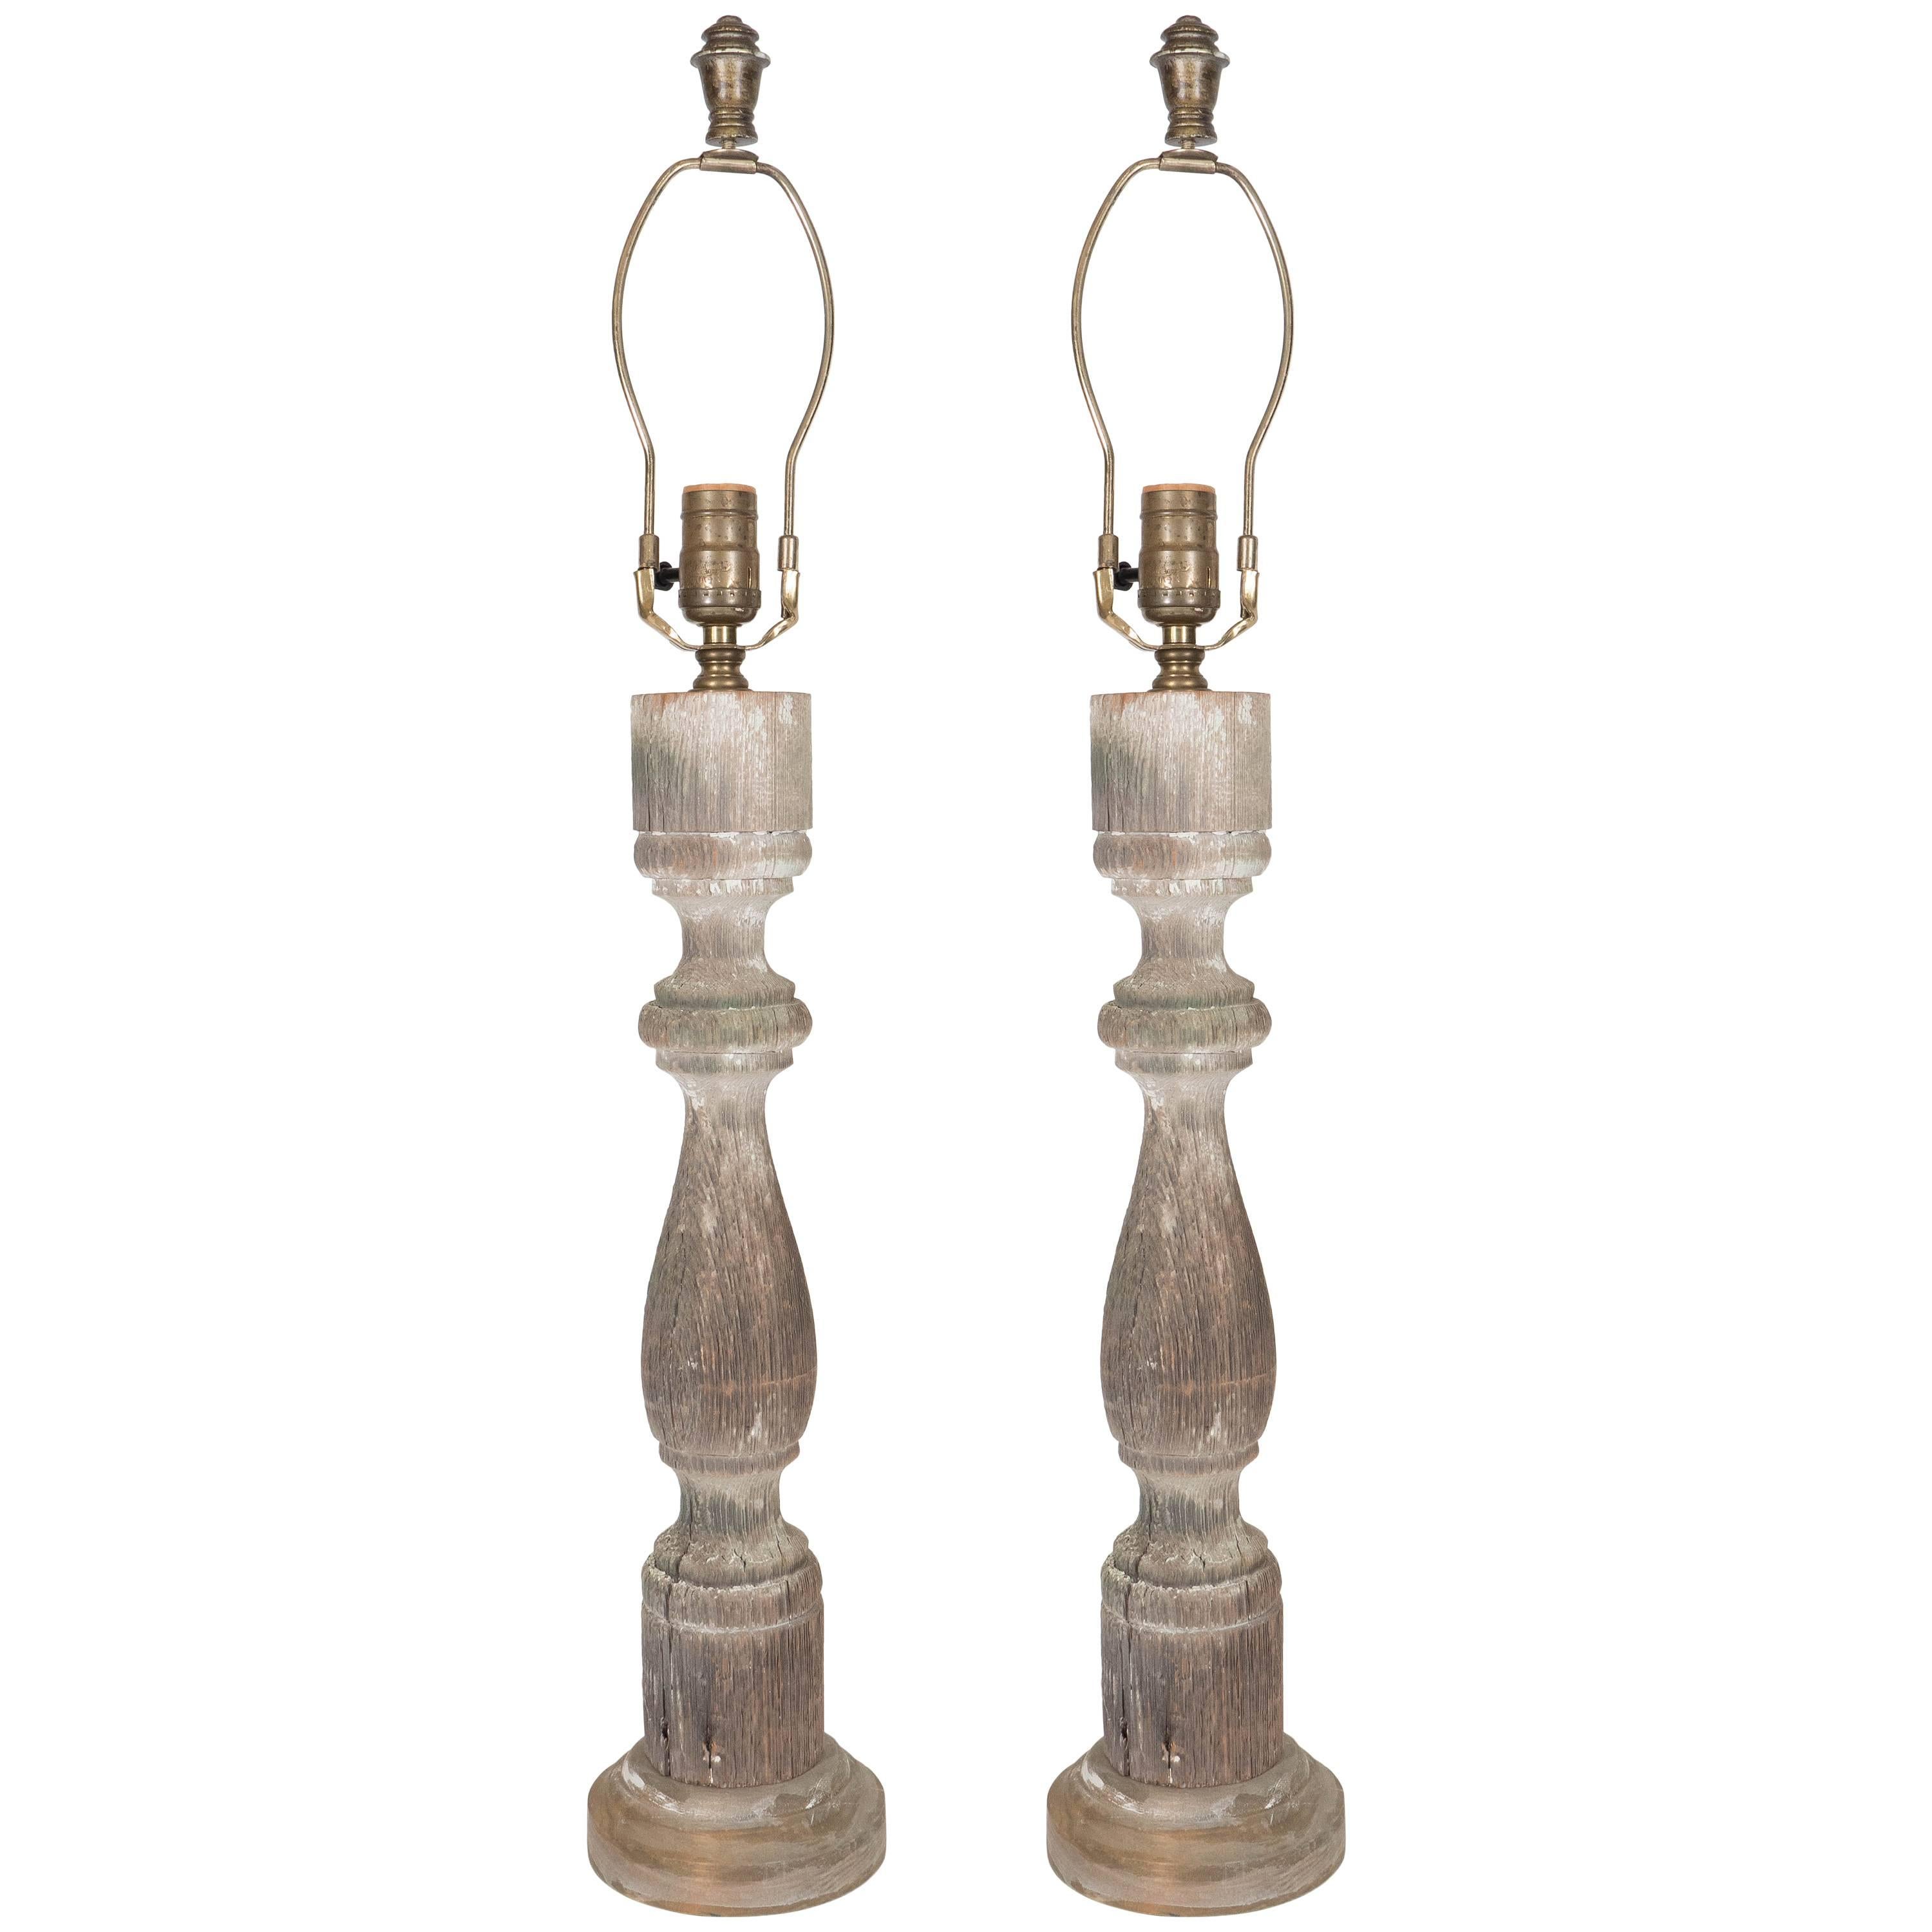 Pair of Antique Weathered Baluster Lamps